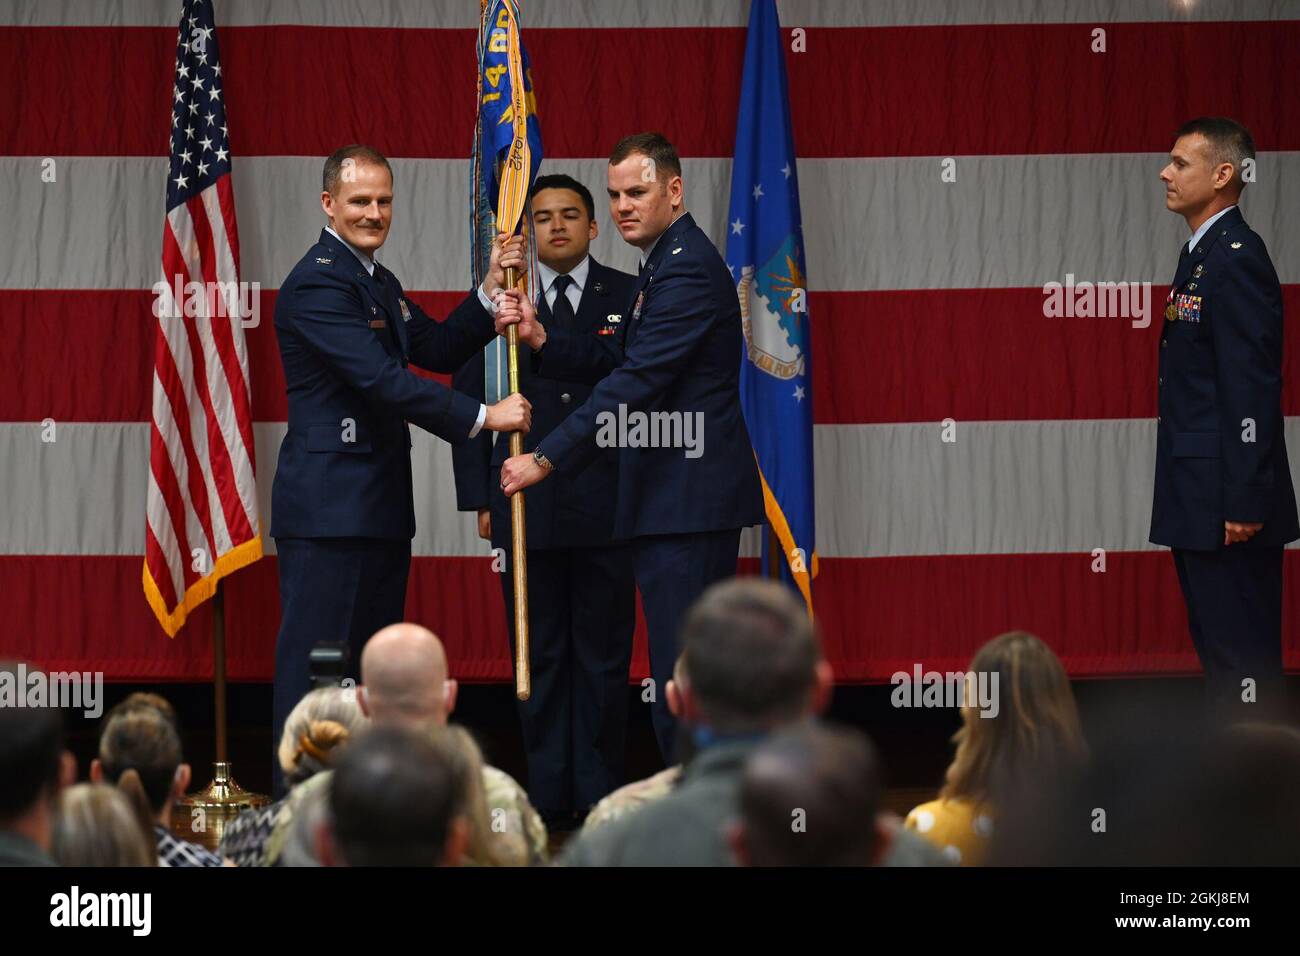 Col. Justin Spears, 14th Operations Group commander, hands Lt. Col. Paul Anderson, 50th Flying Training Squadron commander, the 50th FTS guidon at the 50th FTS change of command ceremony, April 30, 2021, on Columbus Air Force Base, Miss. The advanced phase of undergraduate pilot training is conducted by the 50th FTS where students fly the T-38C Talon trainer aircraft. Stock Photo